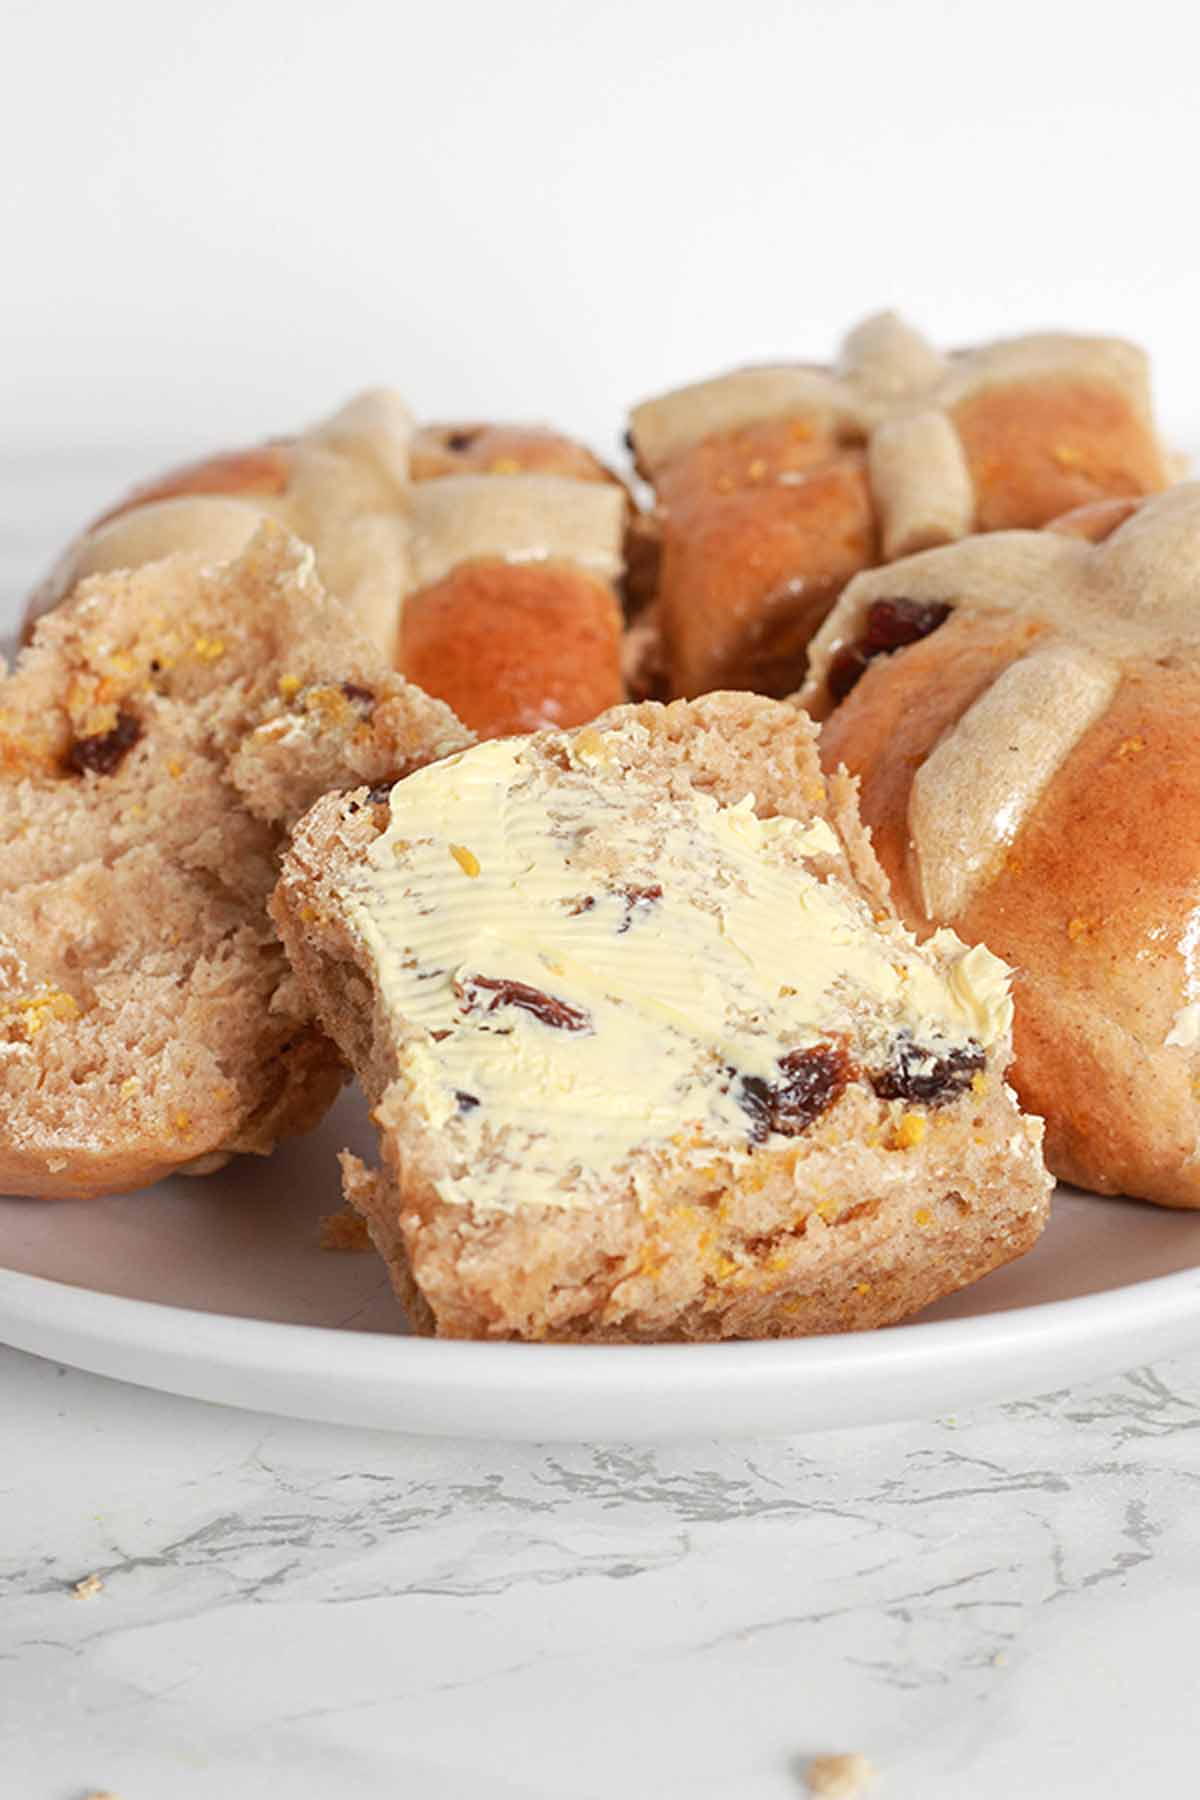 Hot Cross Buns On A Plate, One Is Cut Open With Margarine Spread On Top